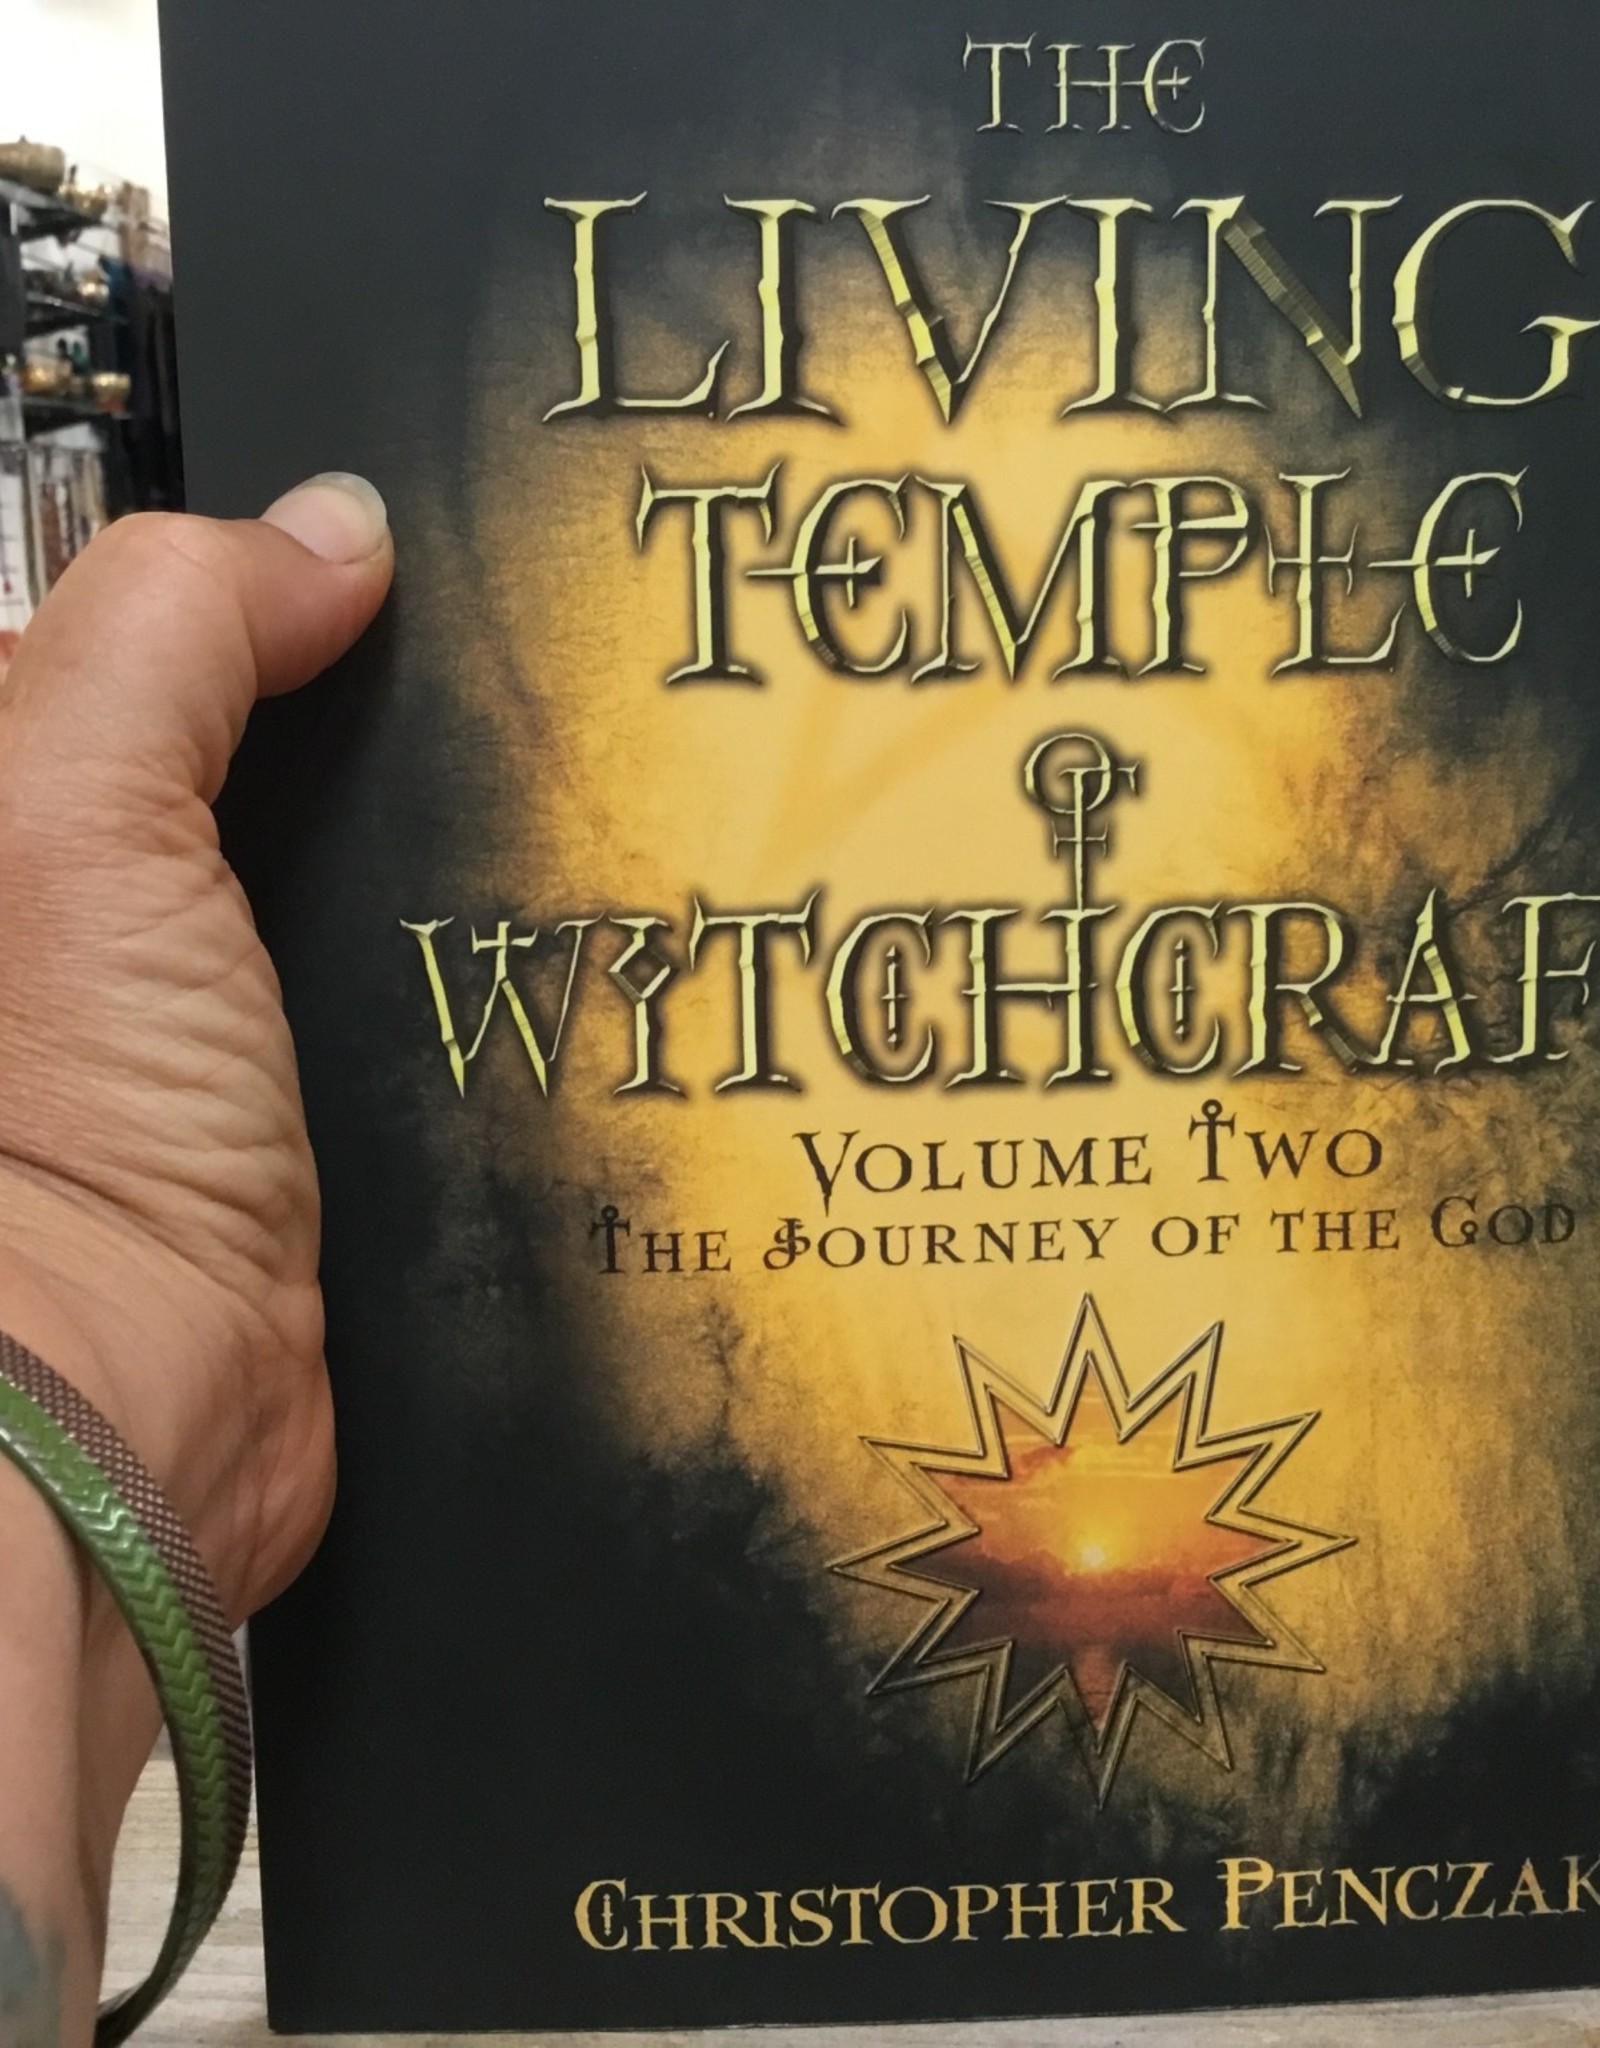 The Living Temple of Witchcraft VOL 2